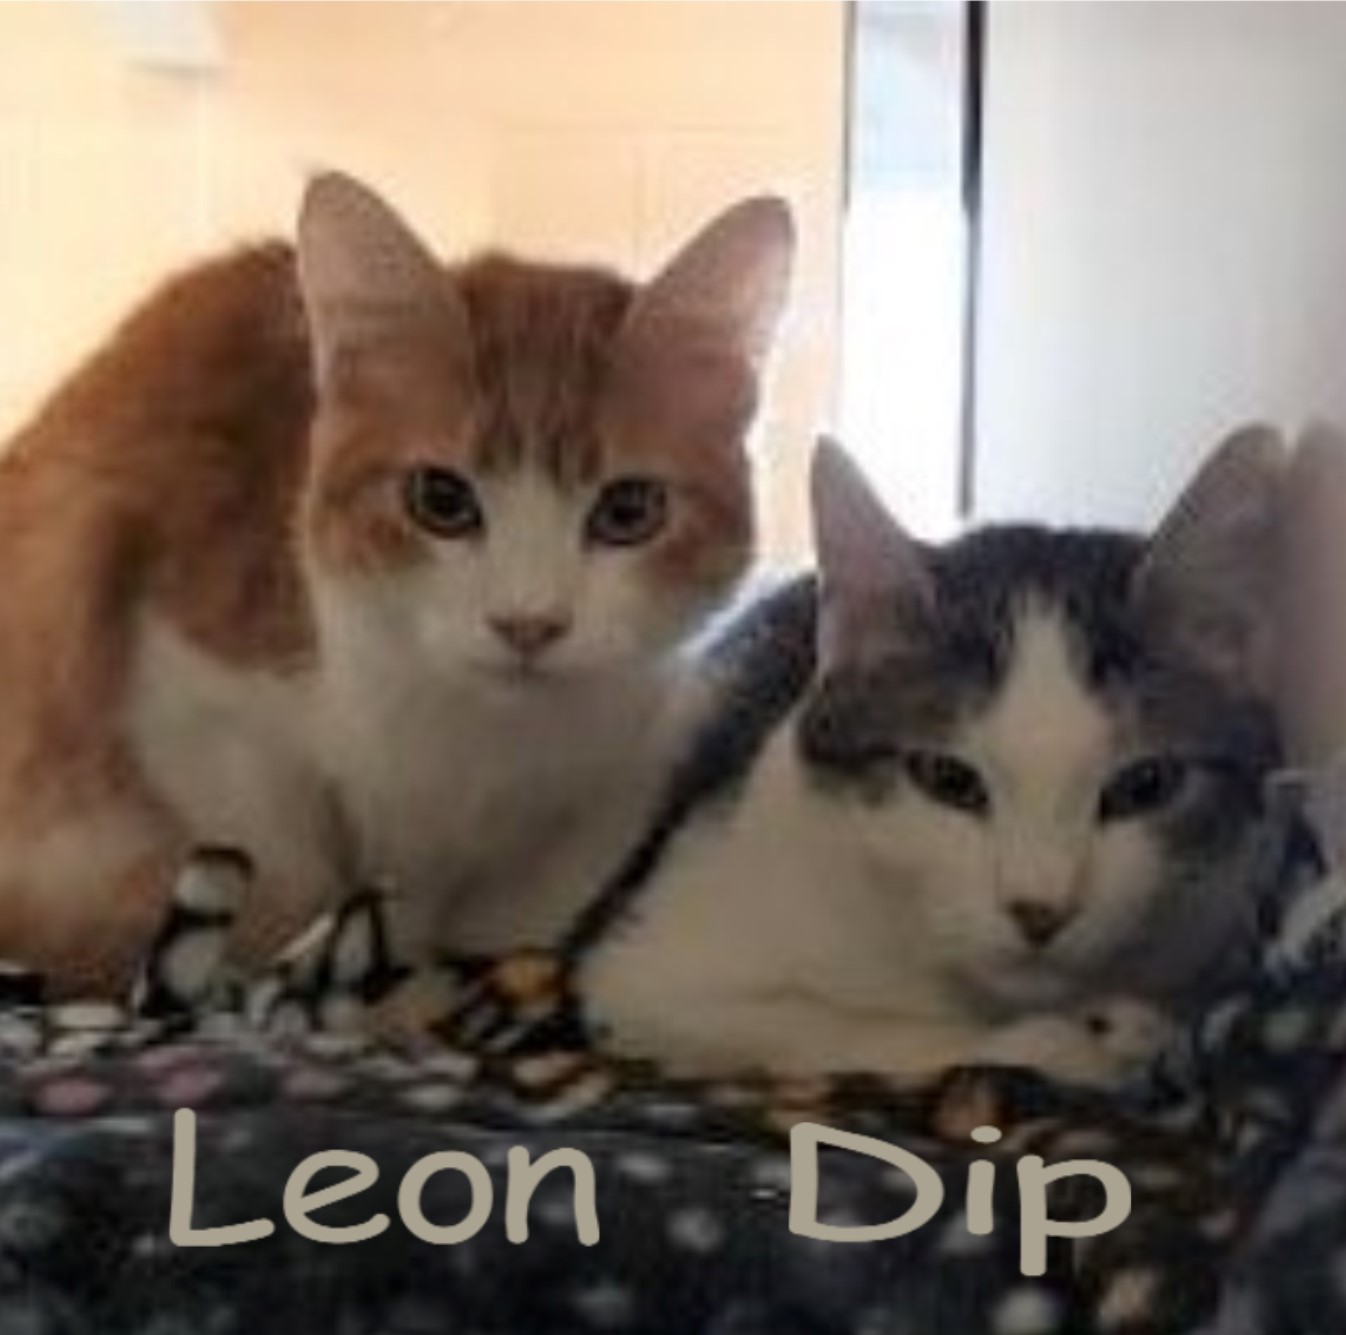 Leon And Dip detail page